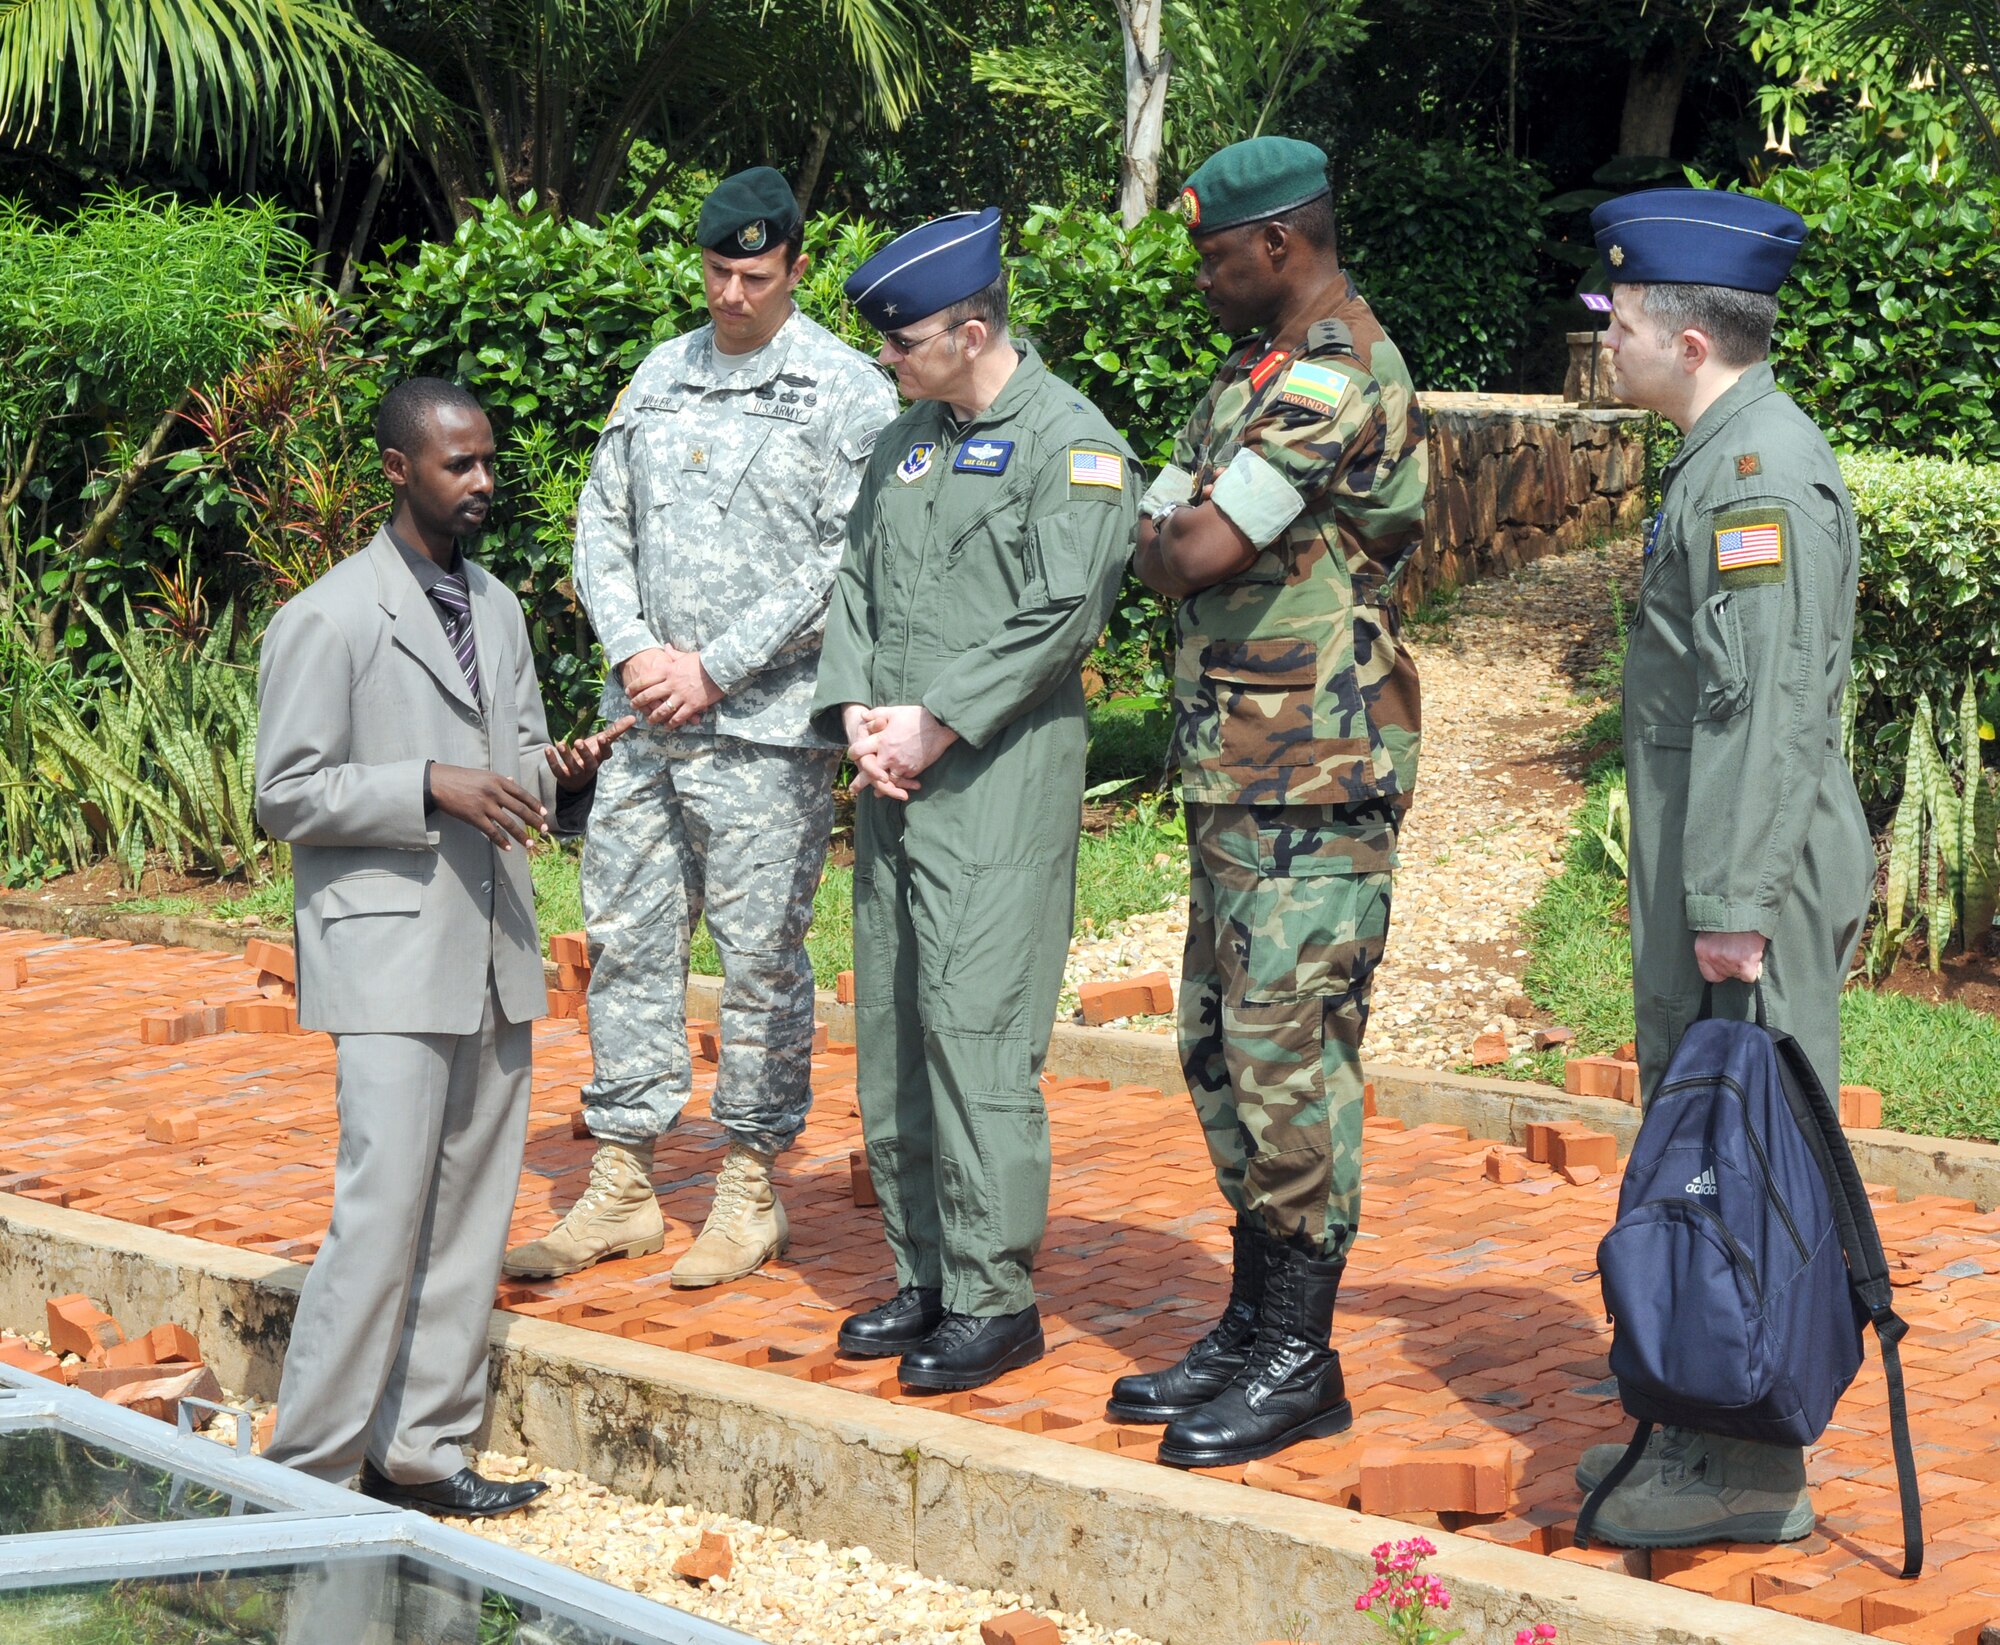 (Left to right) Rwandan Genocide Museum guide Emmanuel Gagasana explains a display with mass graves of victims of the 1994 Rwandan Genocide to Army Maj. Ron Miller, U.S. Defense Attache for Rwanda, Seventeenth Air Fore Vice Commander Brig. Gen. Michael Callan, Rwandan Army Col. Charles Kalamba, and 17th AF's Maj. Alesandro Smith March 25 in Kigali, Rwanda. 
General Callan visited Rwanda and Ethiopia during a senior leader engagement to the continent March 24-28. 
Experts estimate more than 50,000 people are buried on the site of the museum. (USAF photo by Master Sgt. Jim Fisher) 